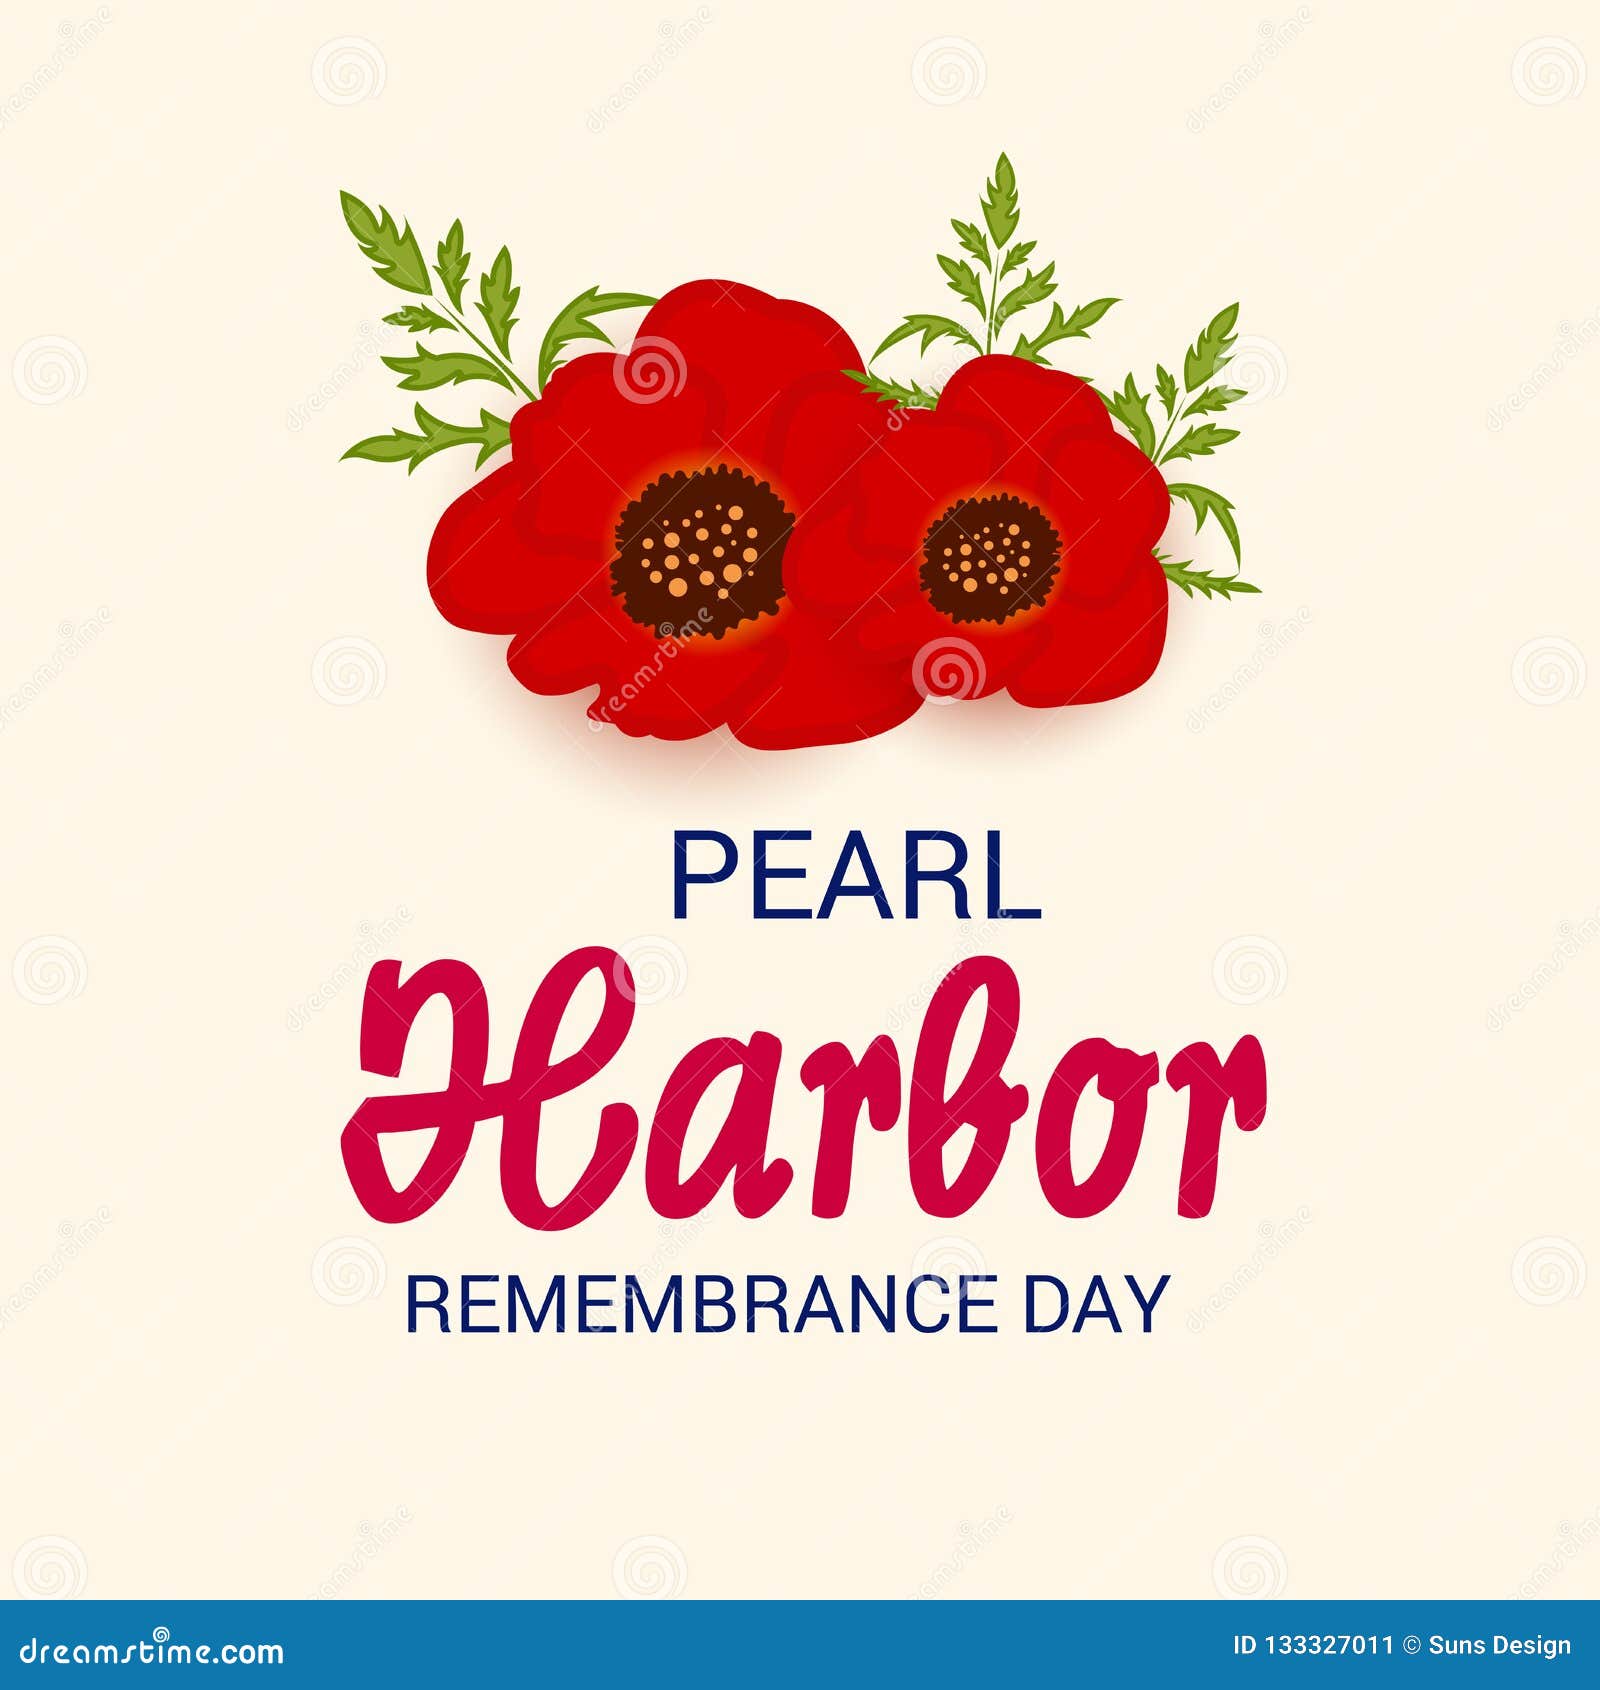 pearl harbor remembrance day.